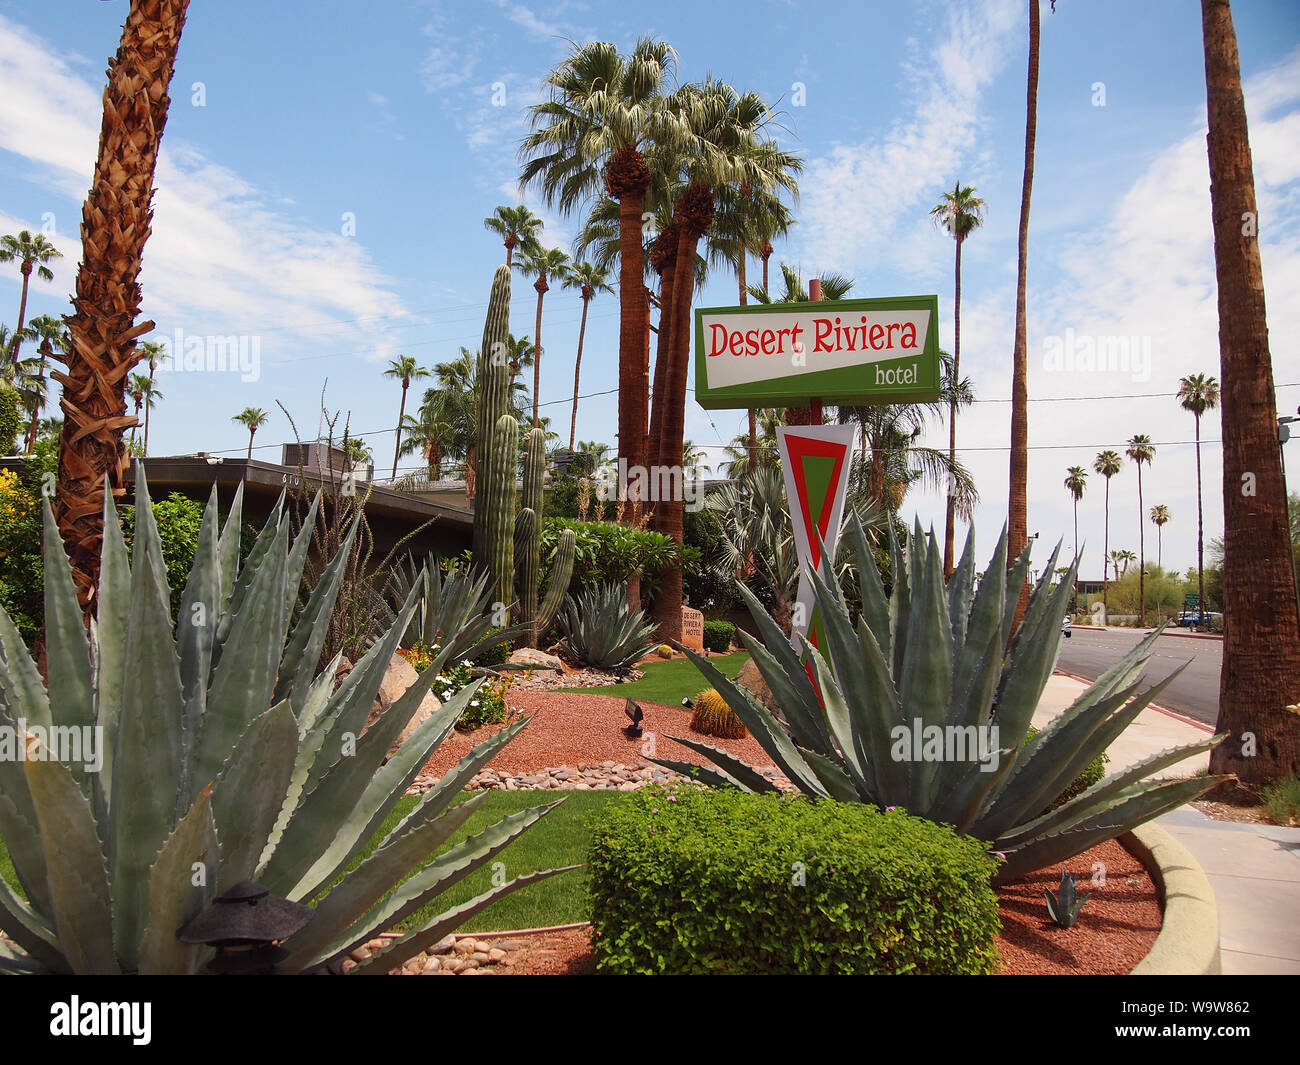 PALM SPRINGS, CALIFORNIA - JULY 18, 2019: The Desert Riviera hotel, built in 1951, features gorgeous cactus gardens surrounding intimate accommodation Stock Photo